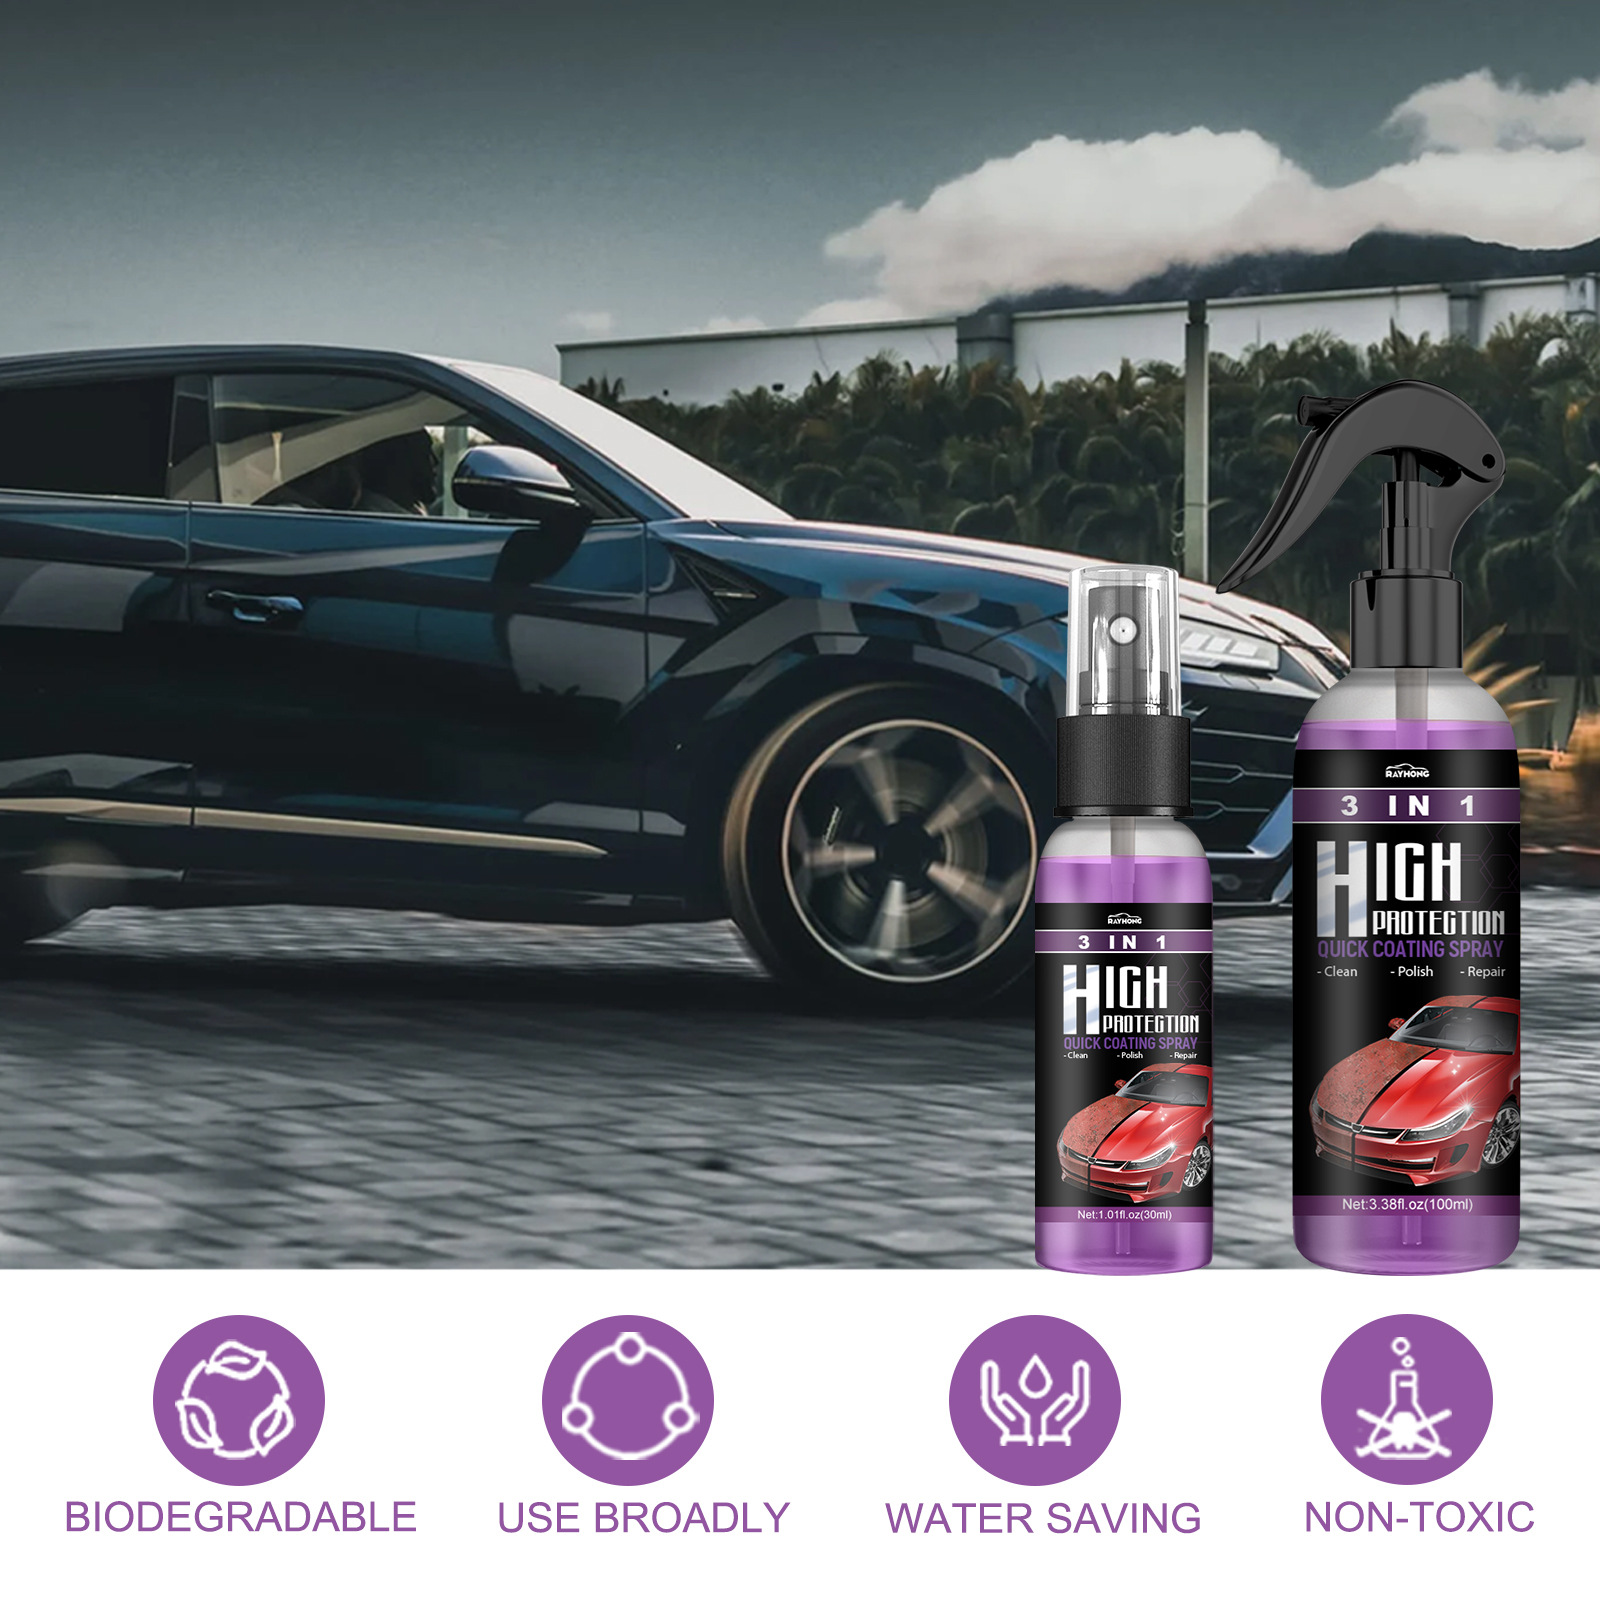 3in1 High Protection Quick Car Coating Spray Rayhong automatic hand paint  color change cleaning coating spray 100ml x1x2x4pcs